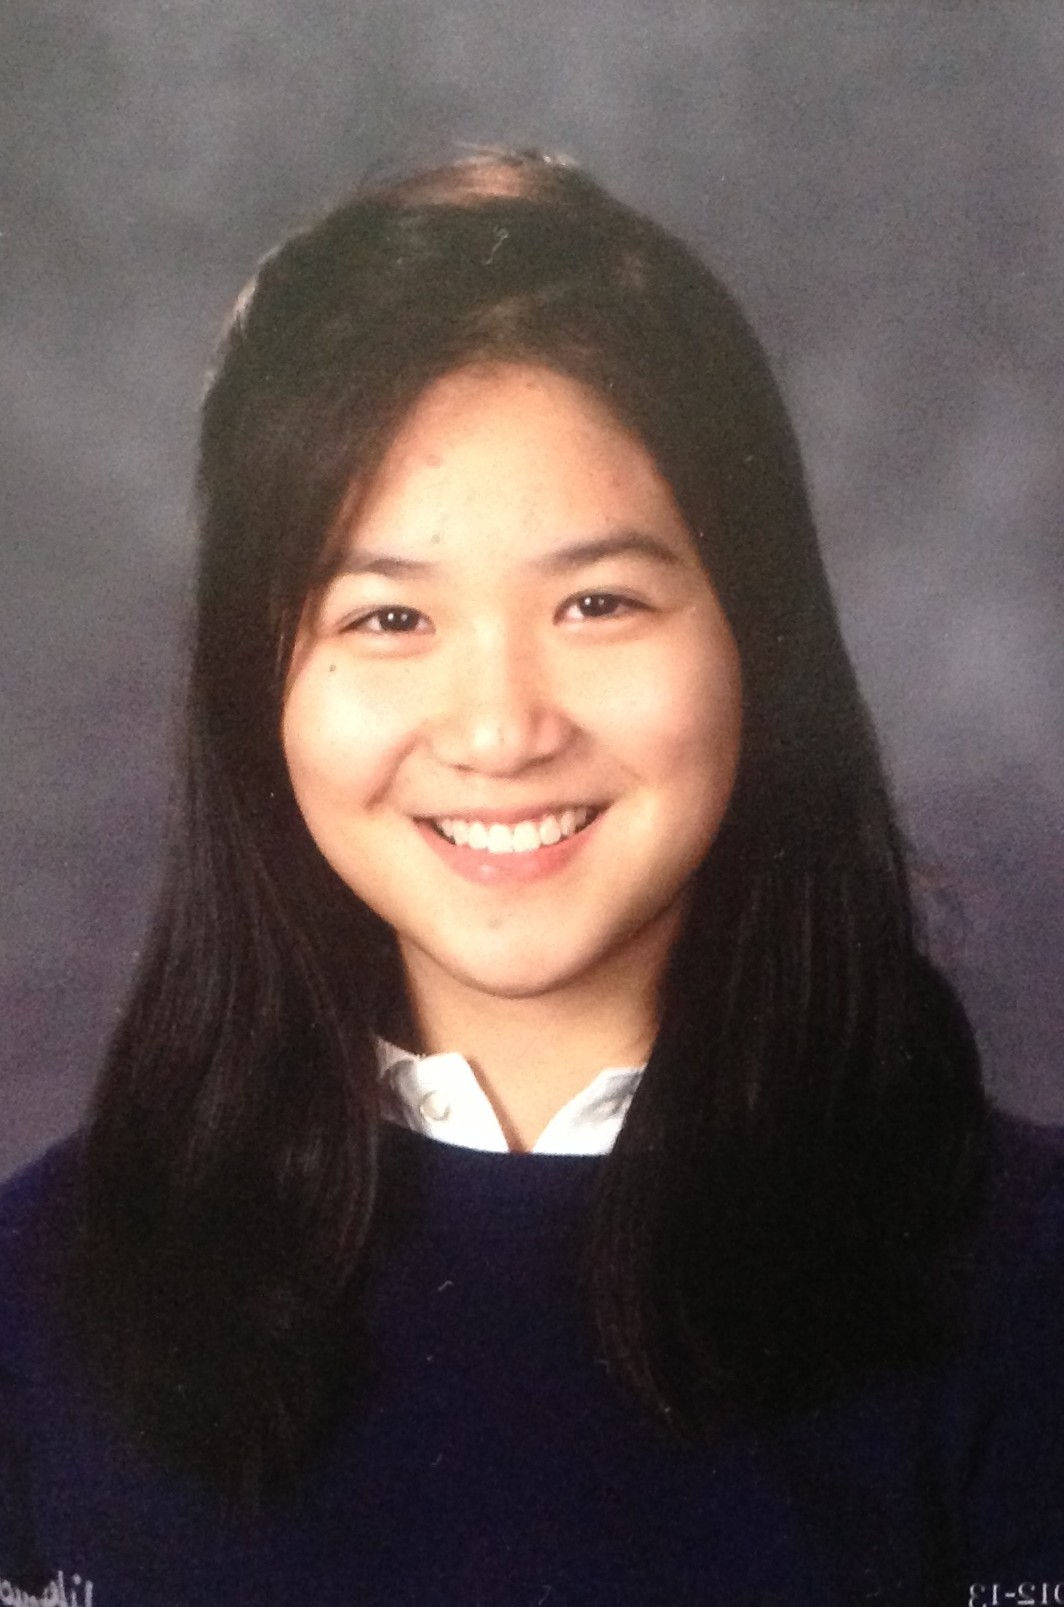 Lisa Peng, 16, takes on the Chinese government for her father’s release